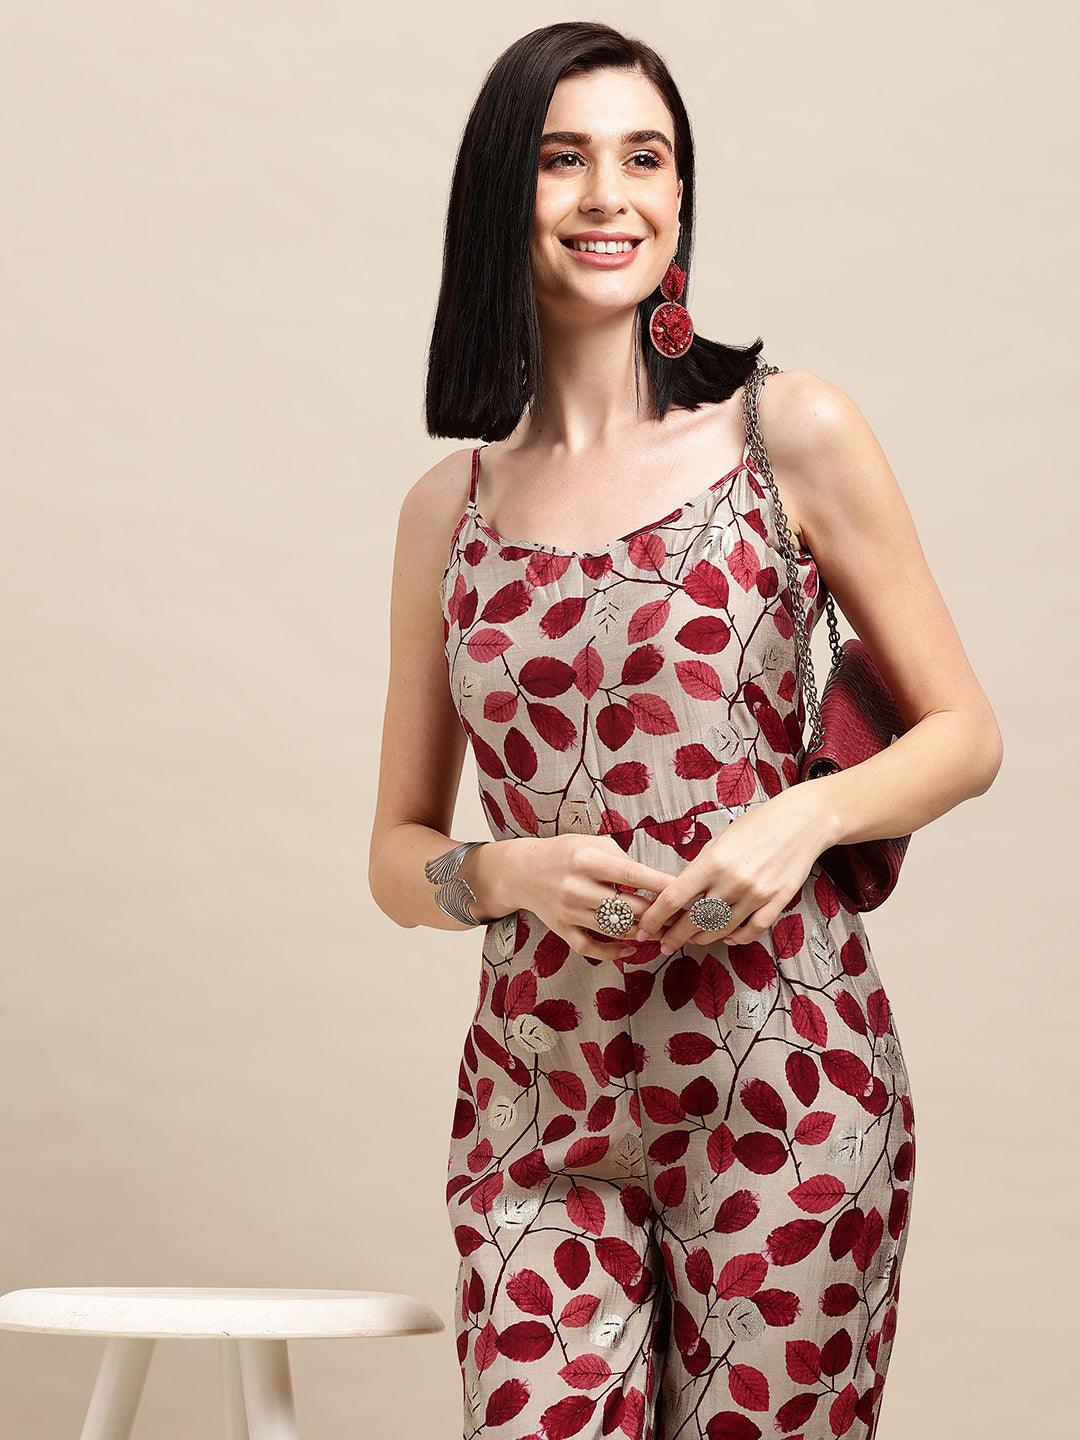 Printed Poly Chinon Maroon Jump Suit - Uboric